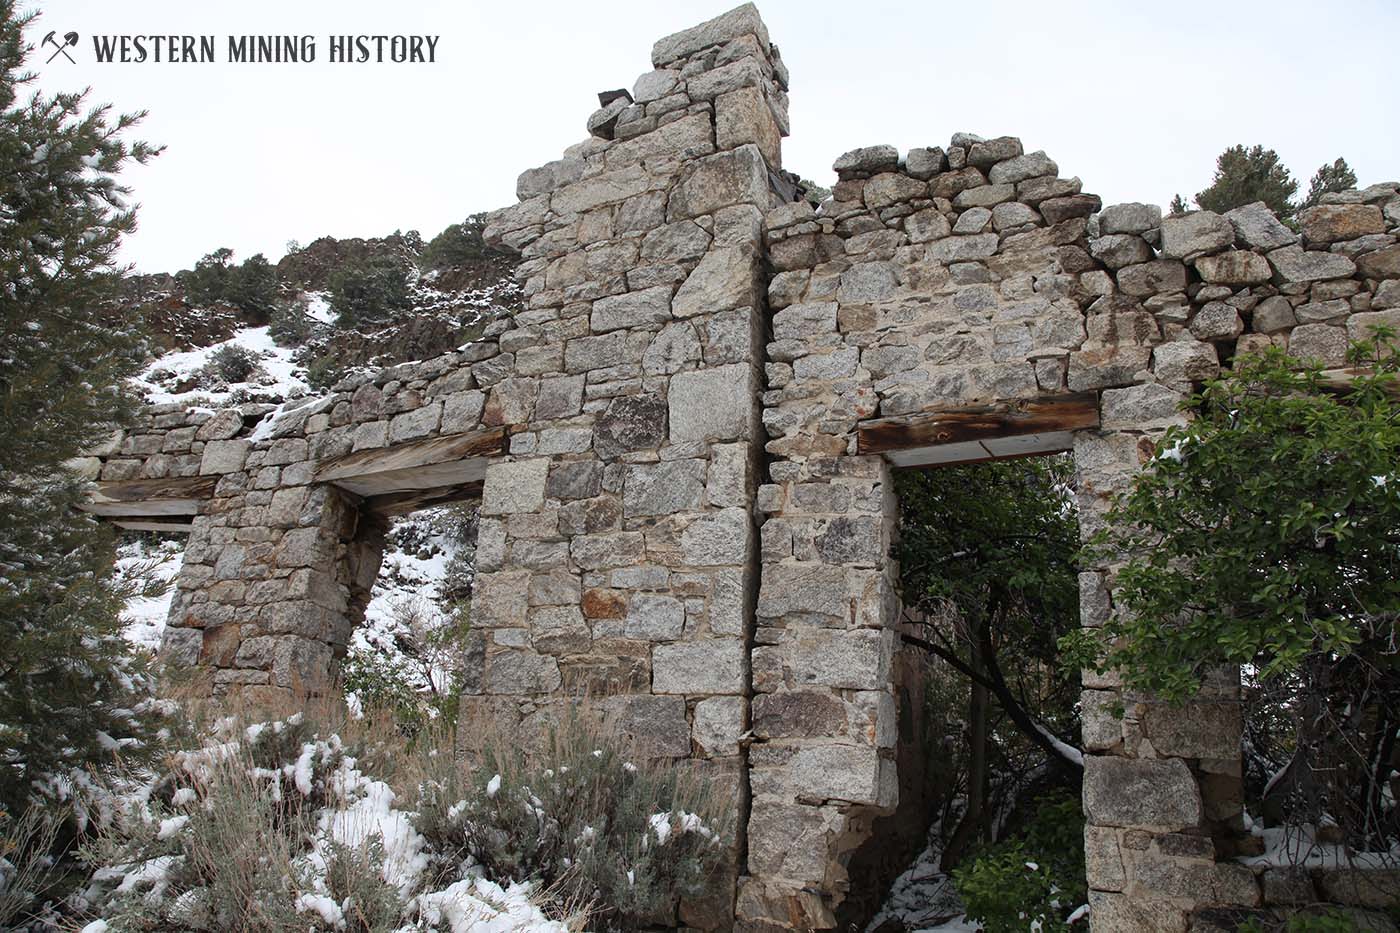 Ruins of stone building at Ophir, Nevada